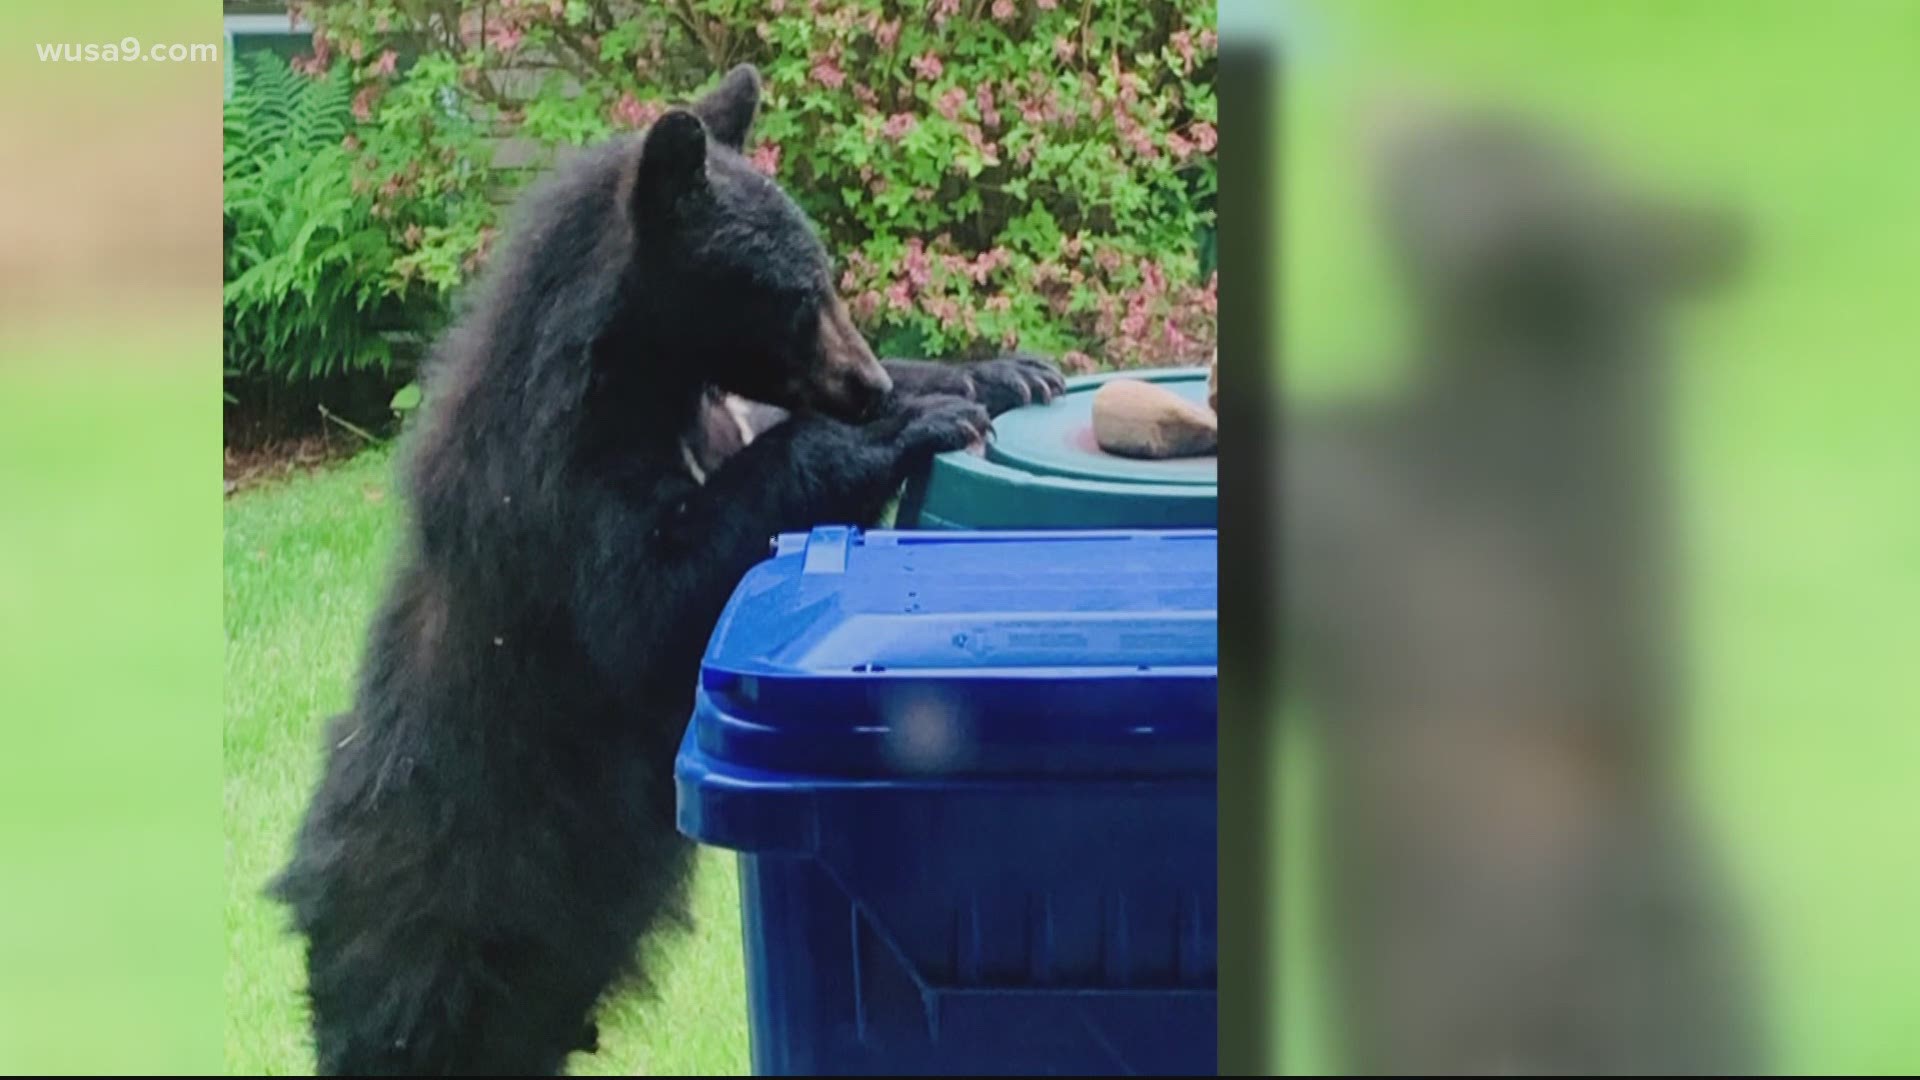 Bear sightings in Montgomery County, preventing encounters